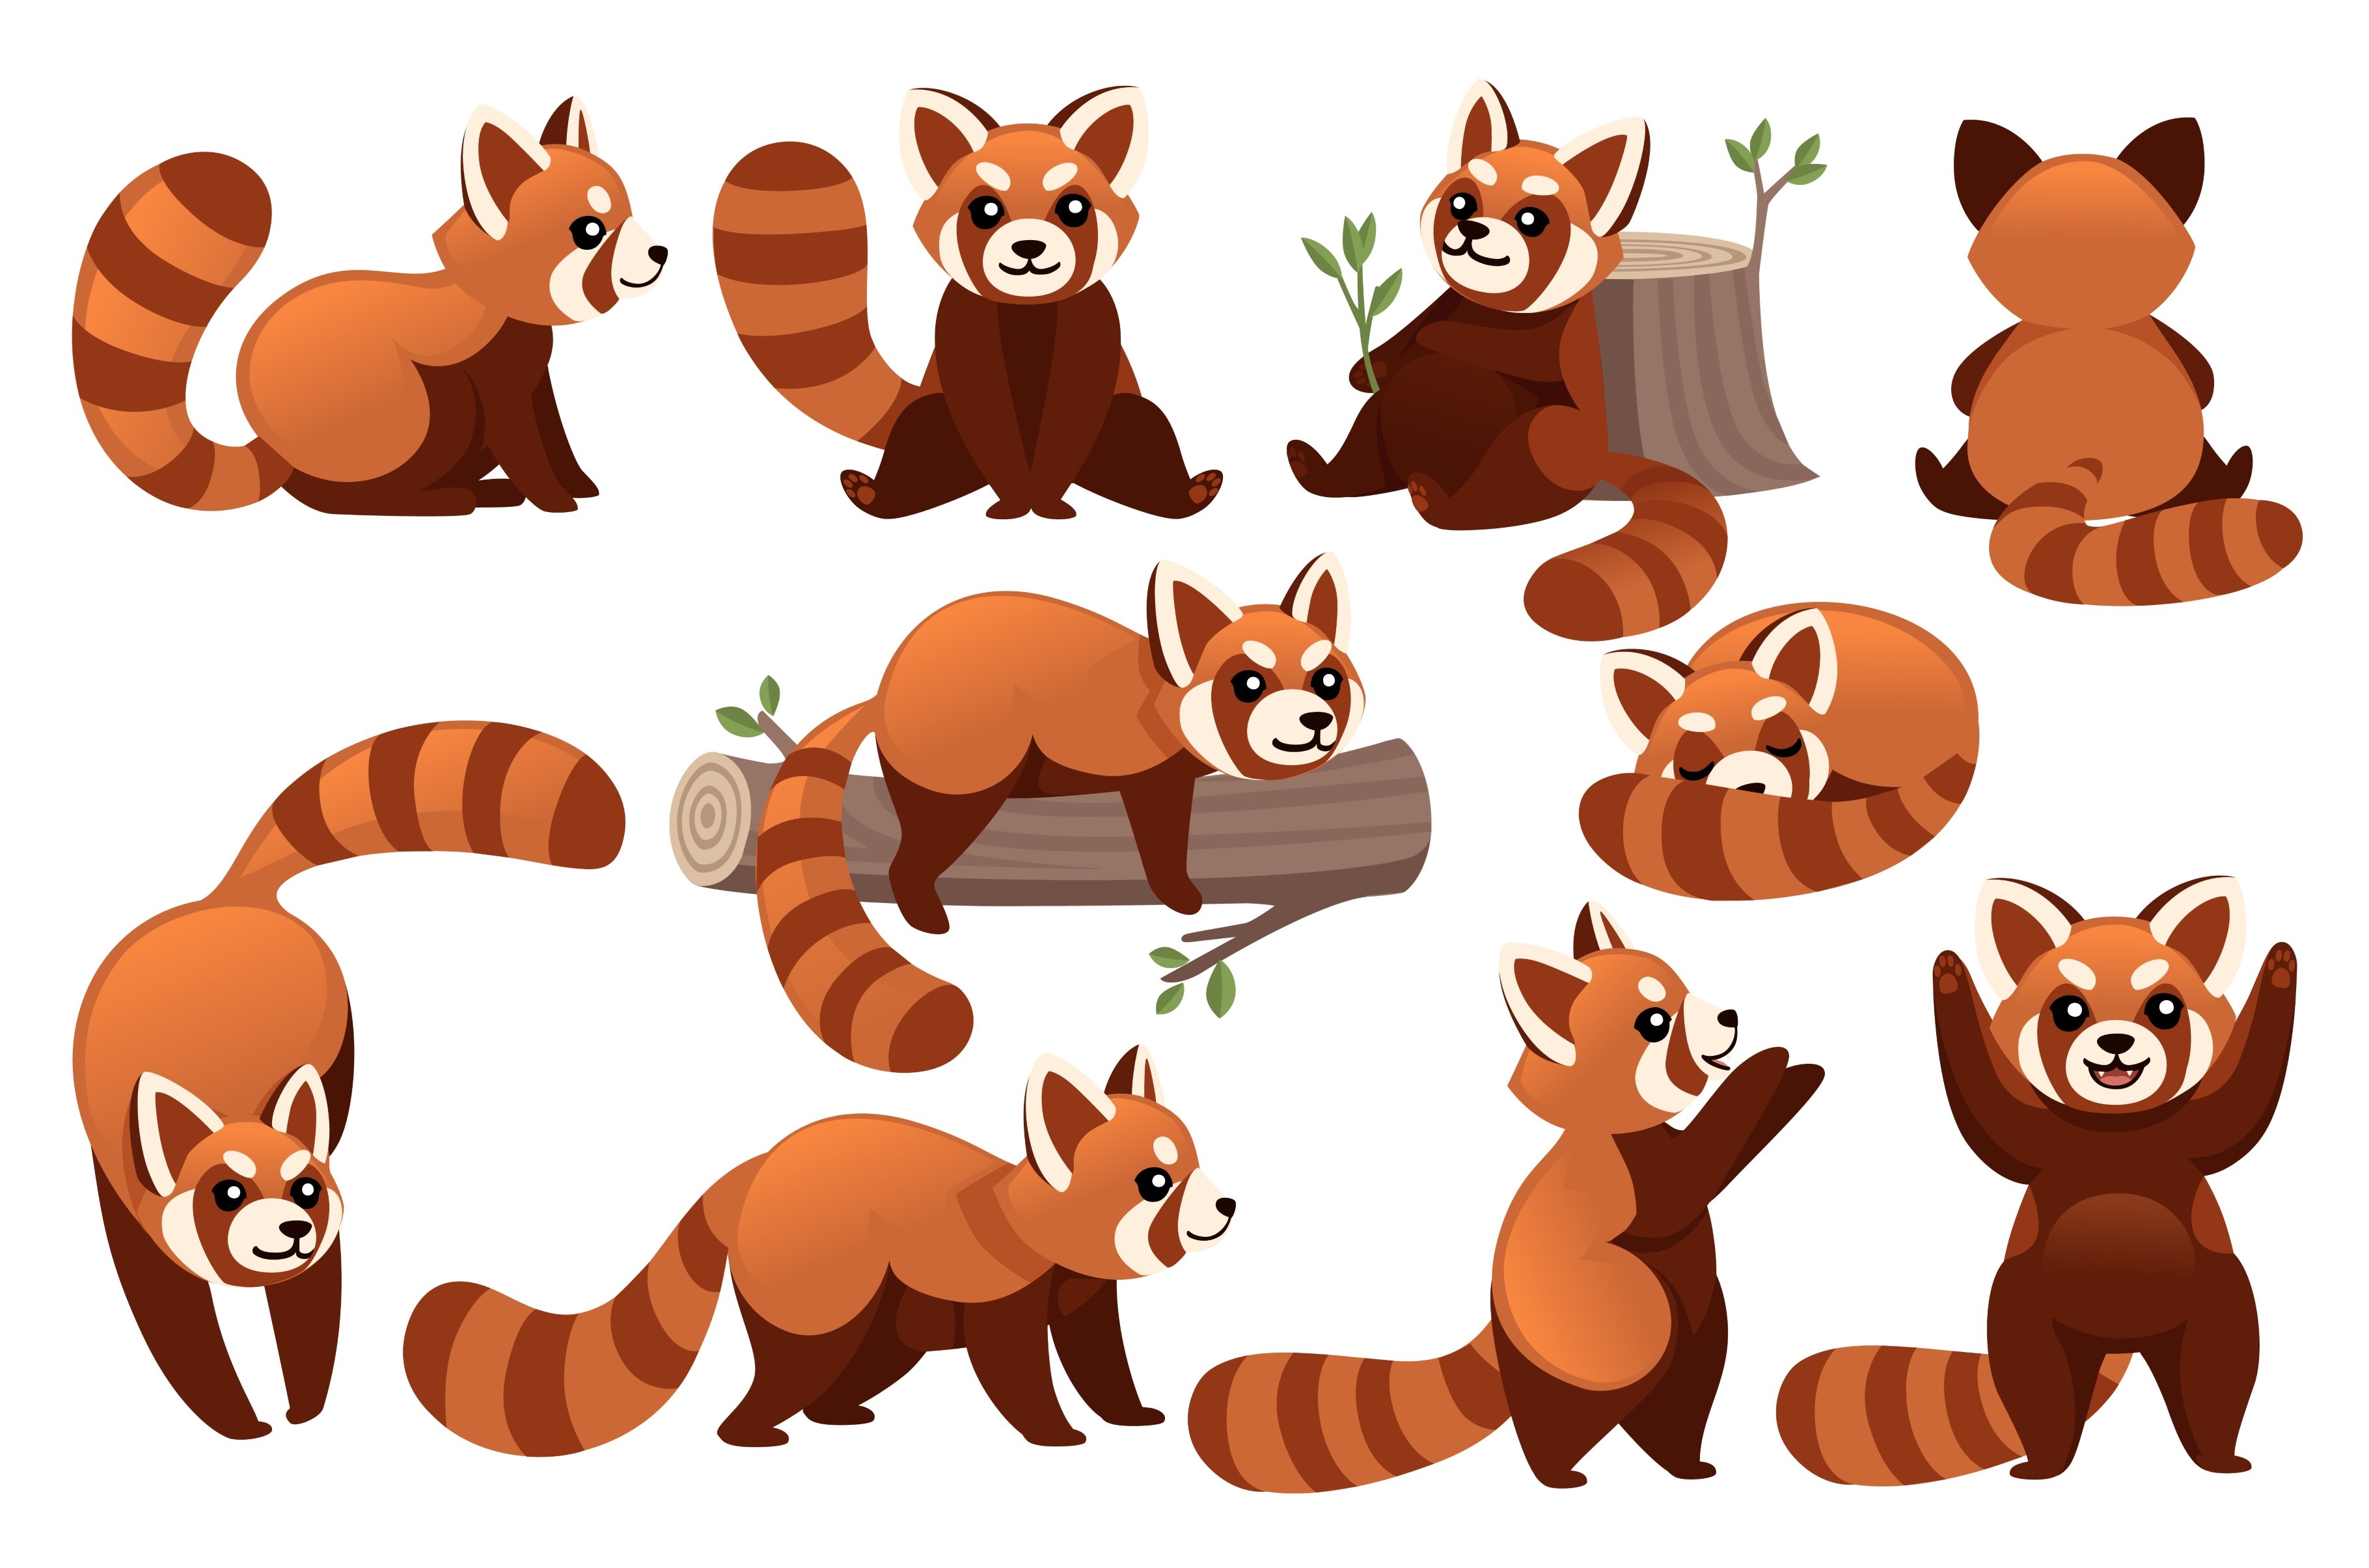 Set of cute adorable red panda in cover image.